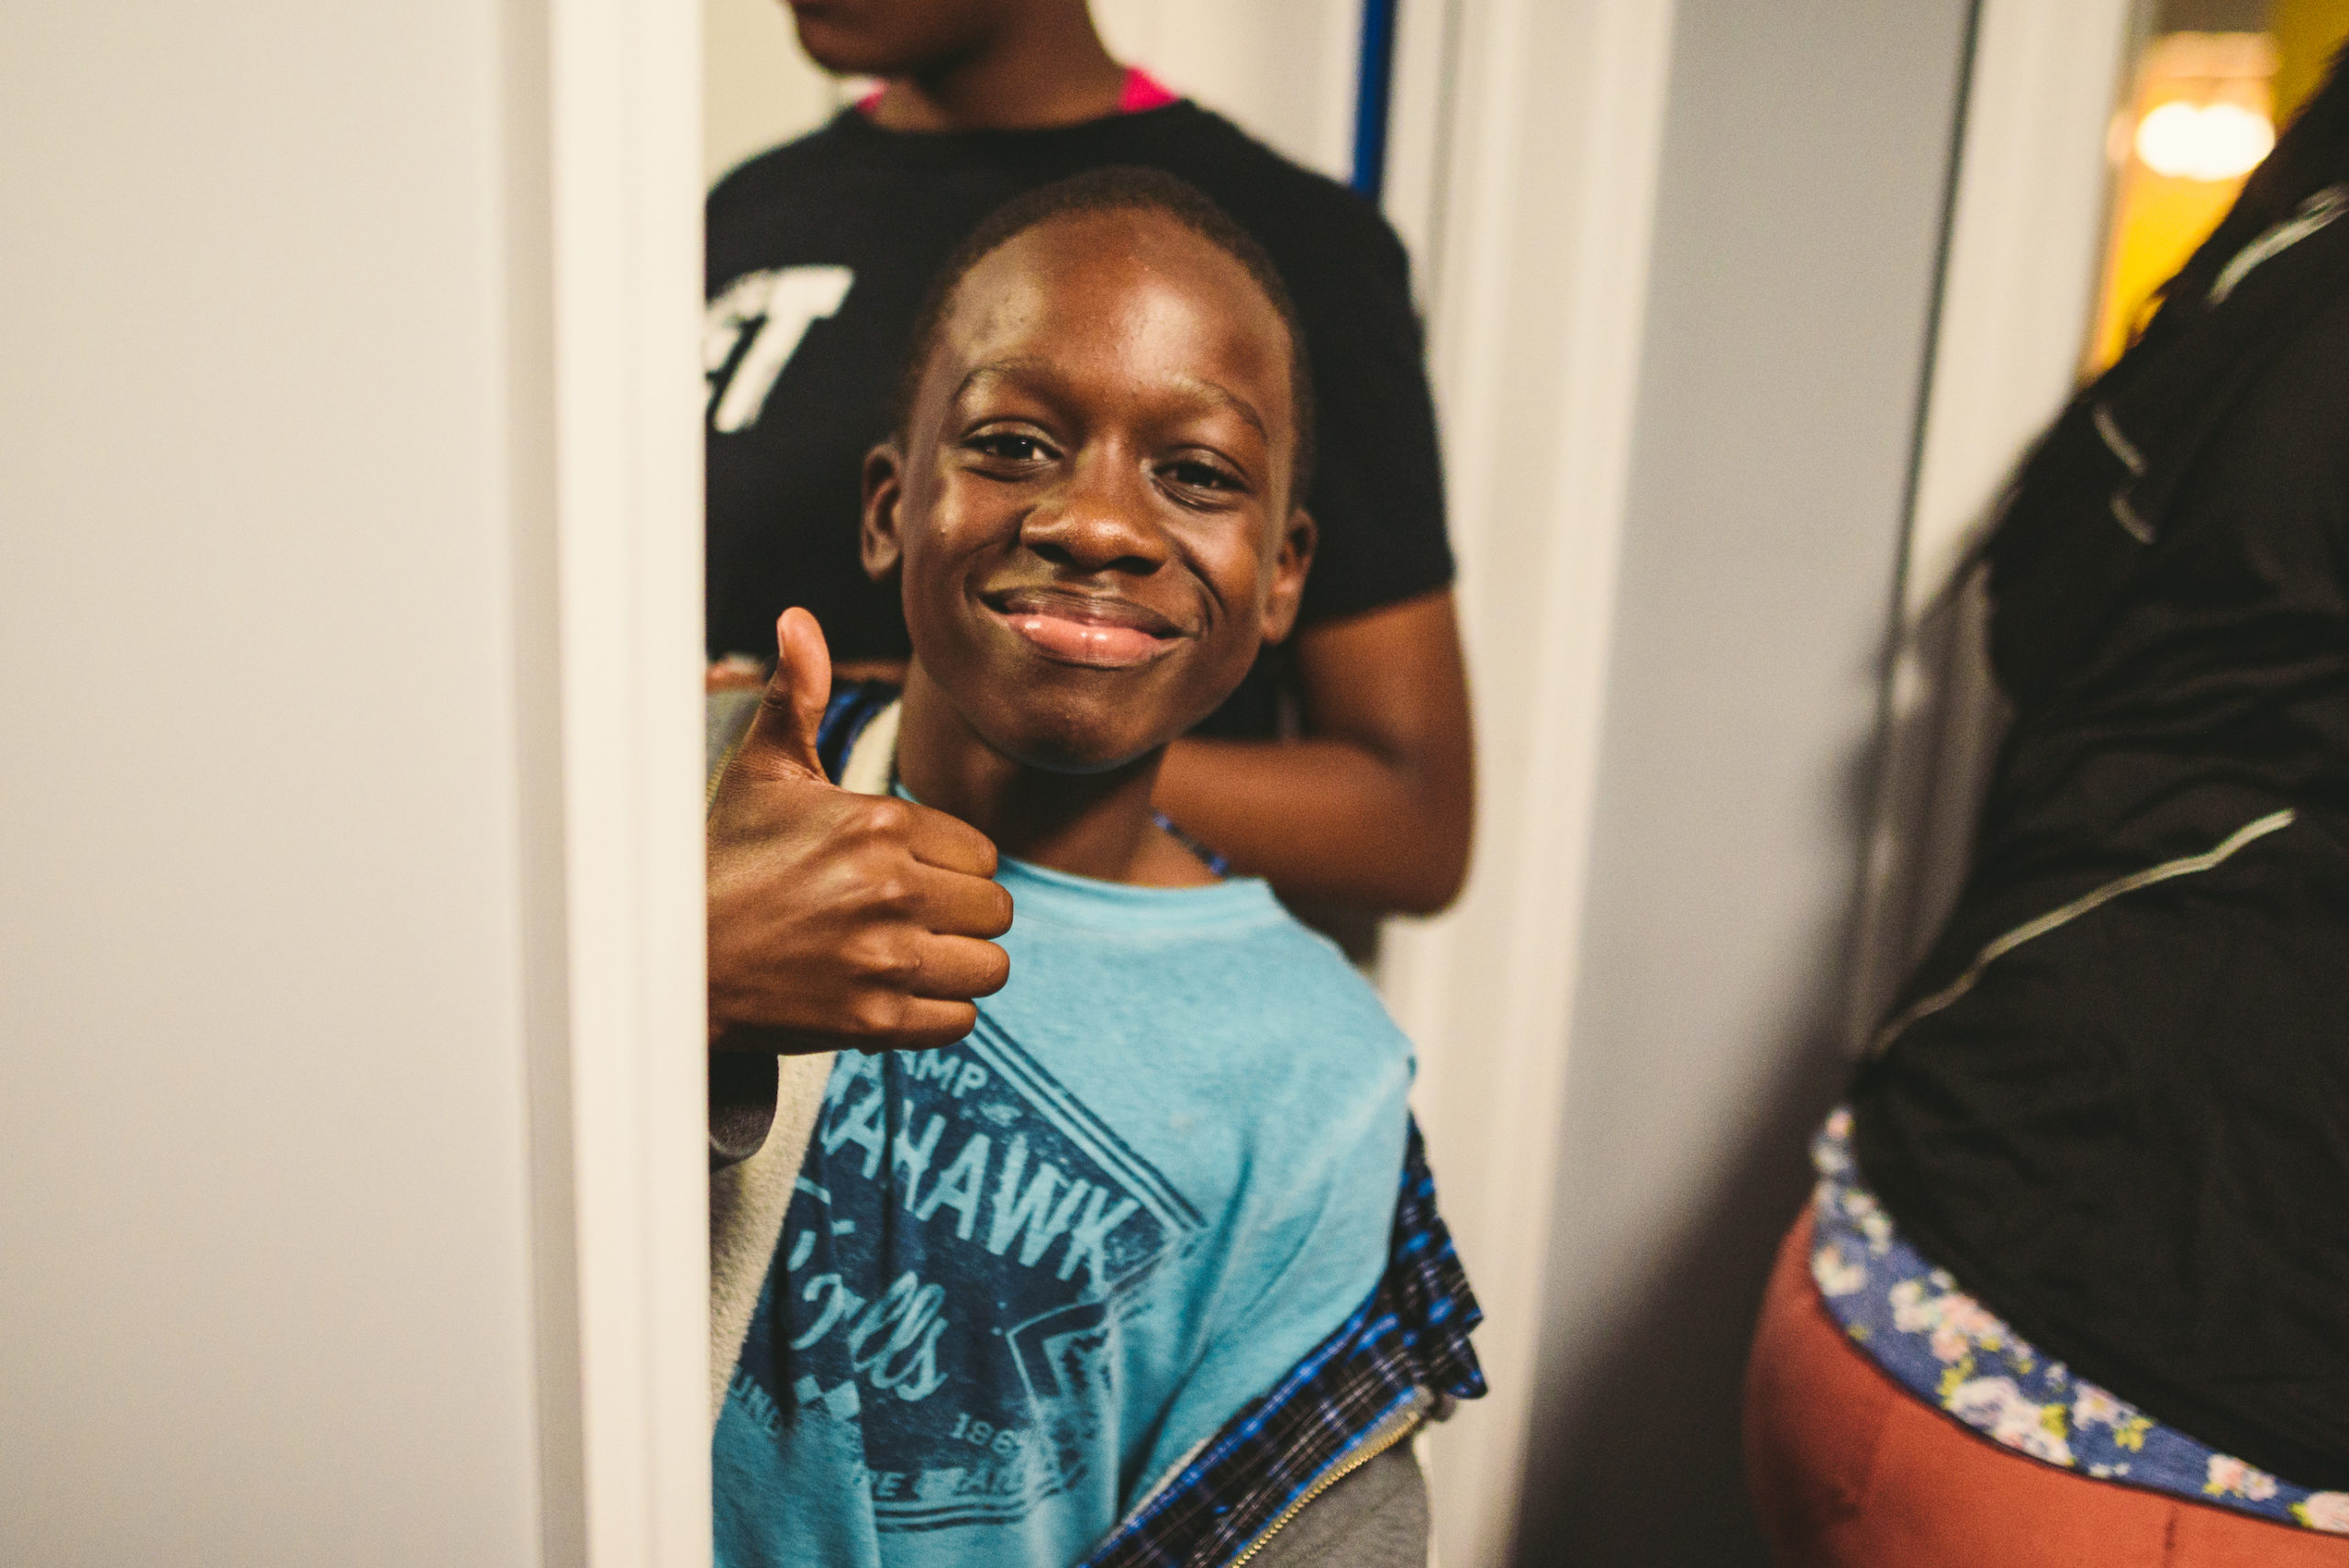 IU CI Studios Handy Nonprofit African American boy wearing a light blue shirt with logo giving a thumbs up and smiling surrounded by people